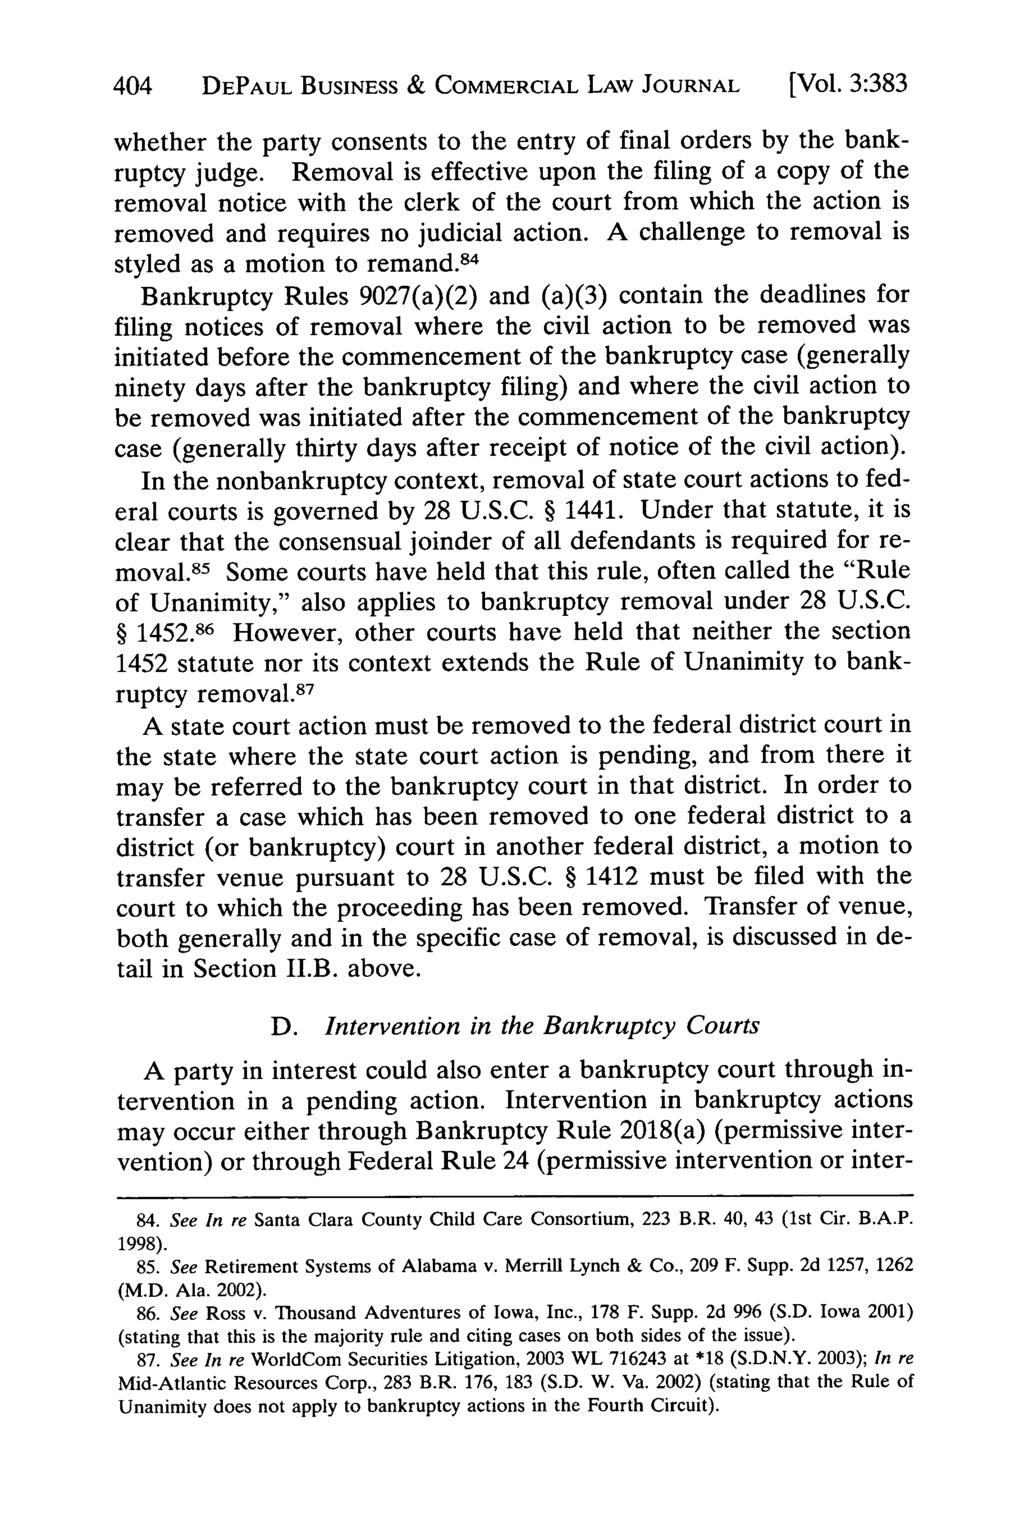 404 DEPAUL BUSINESS & COMMERCIAL LAW JOURNAL [Vol. 3:383 whether the party consents to the entry of final orders by the bankruptcy judge.